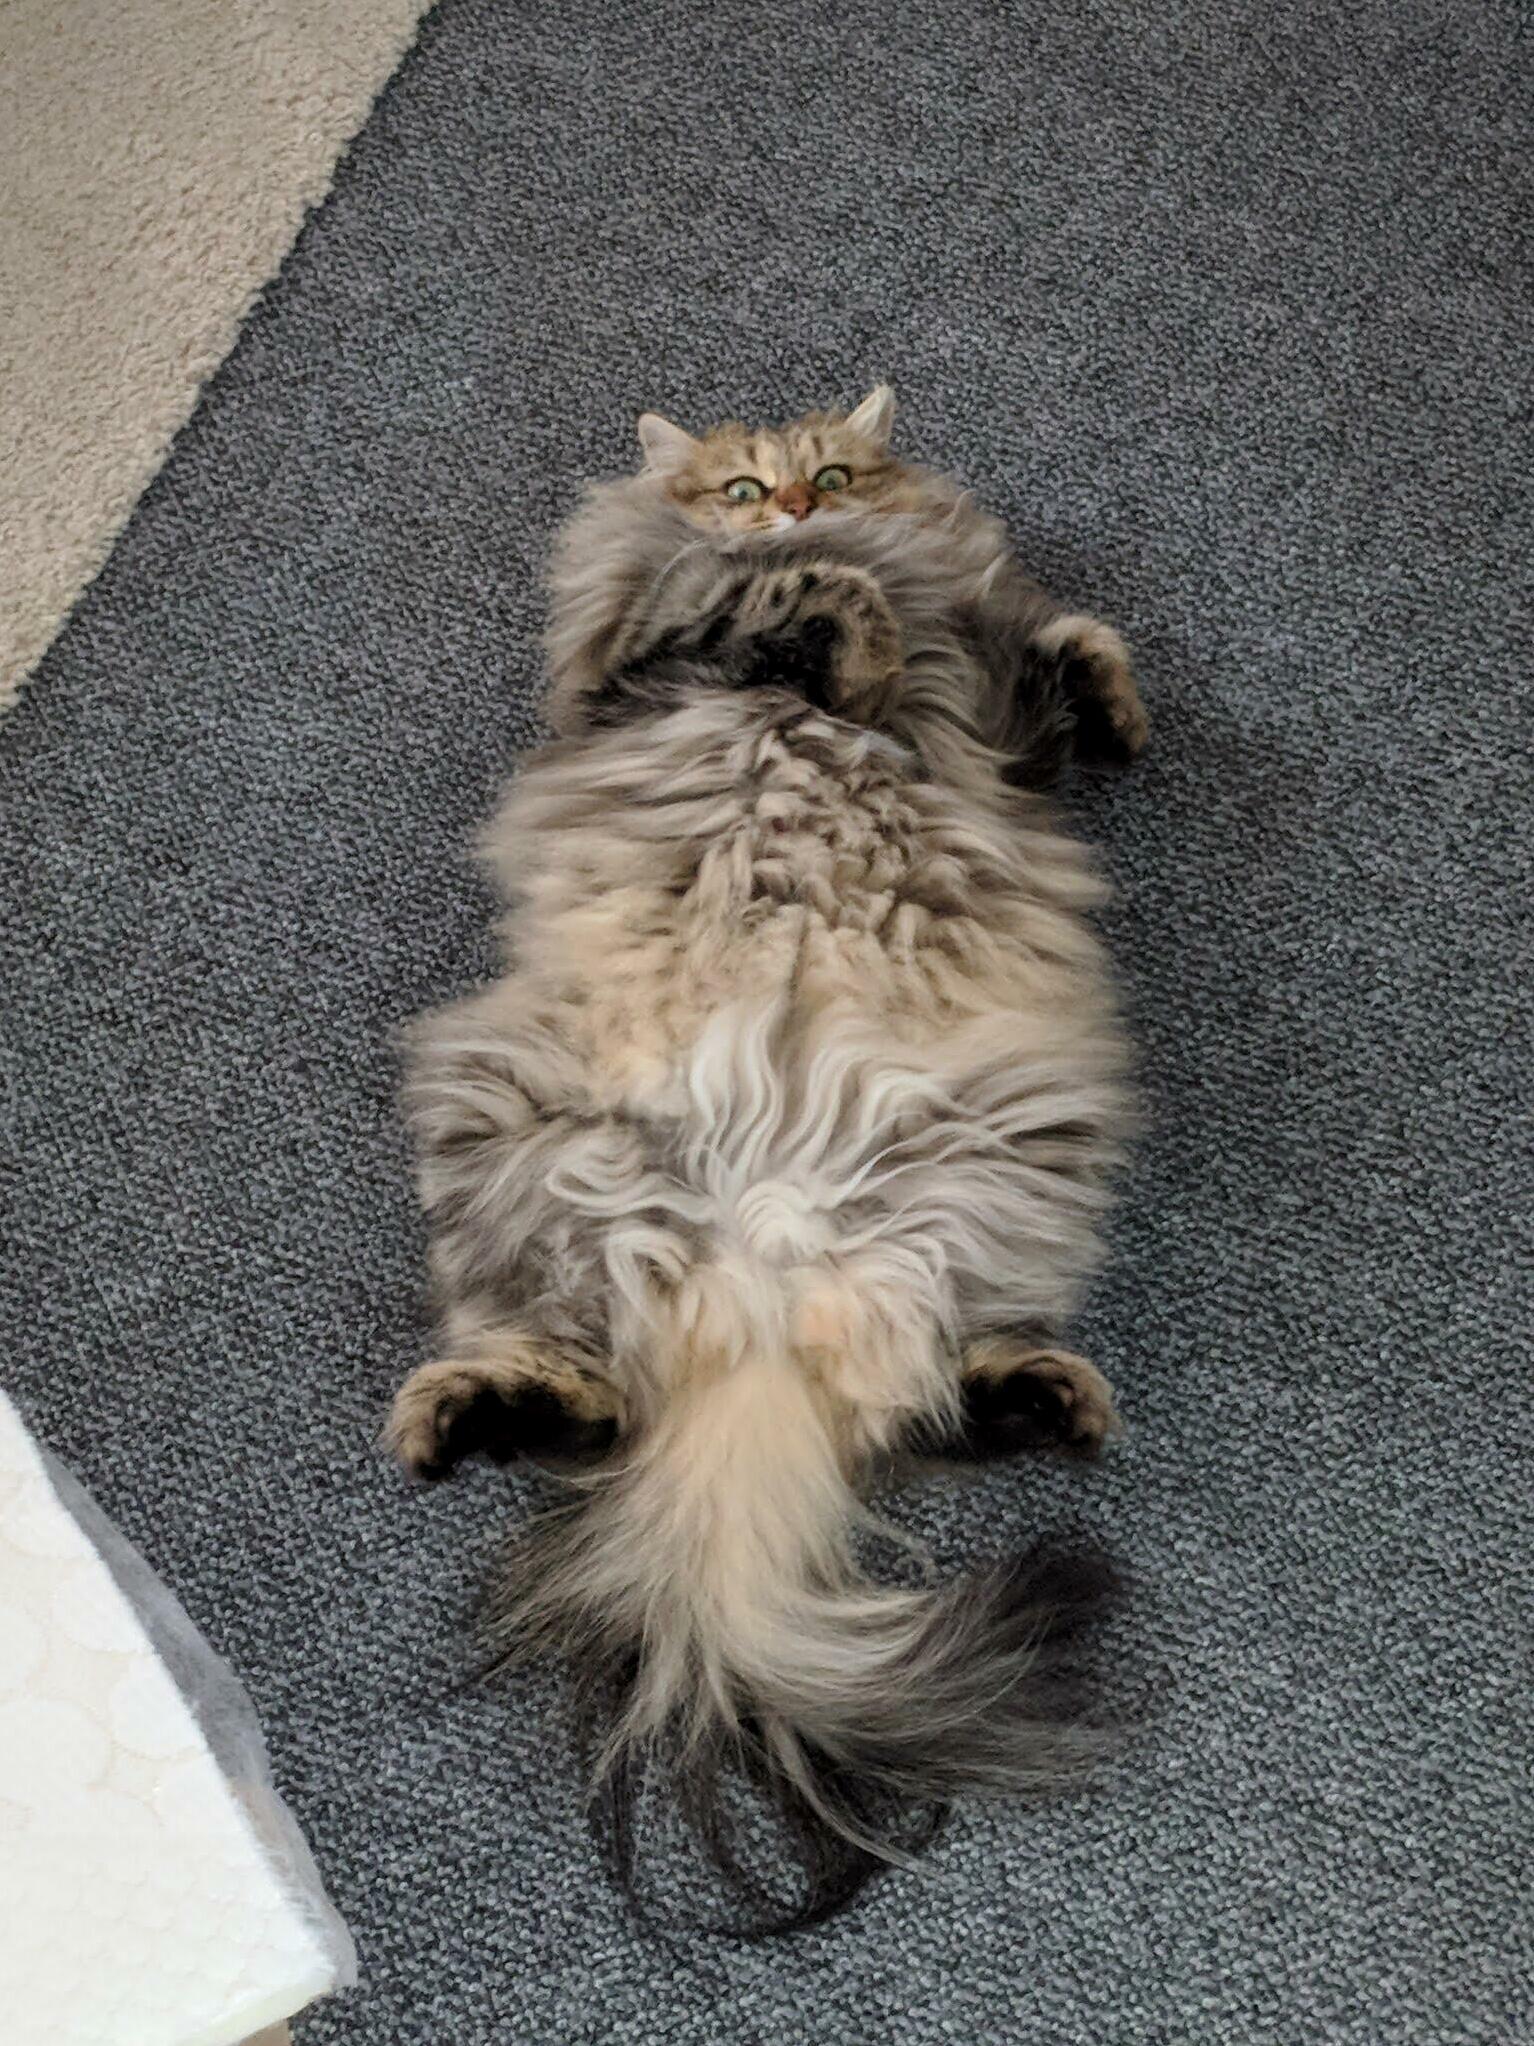 Human removes fluff from carpet – ivy puts fluff back!